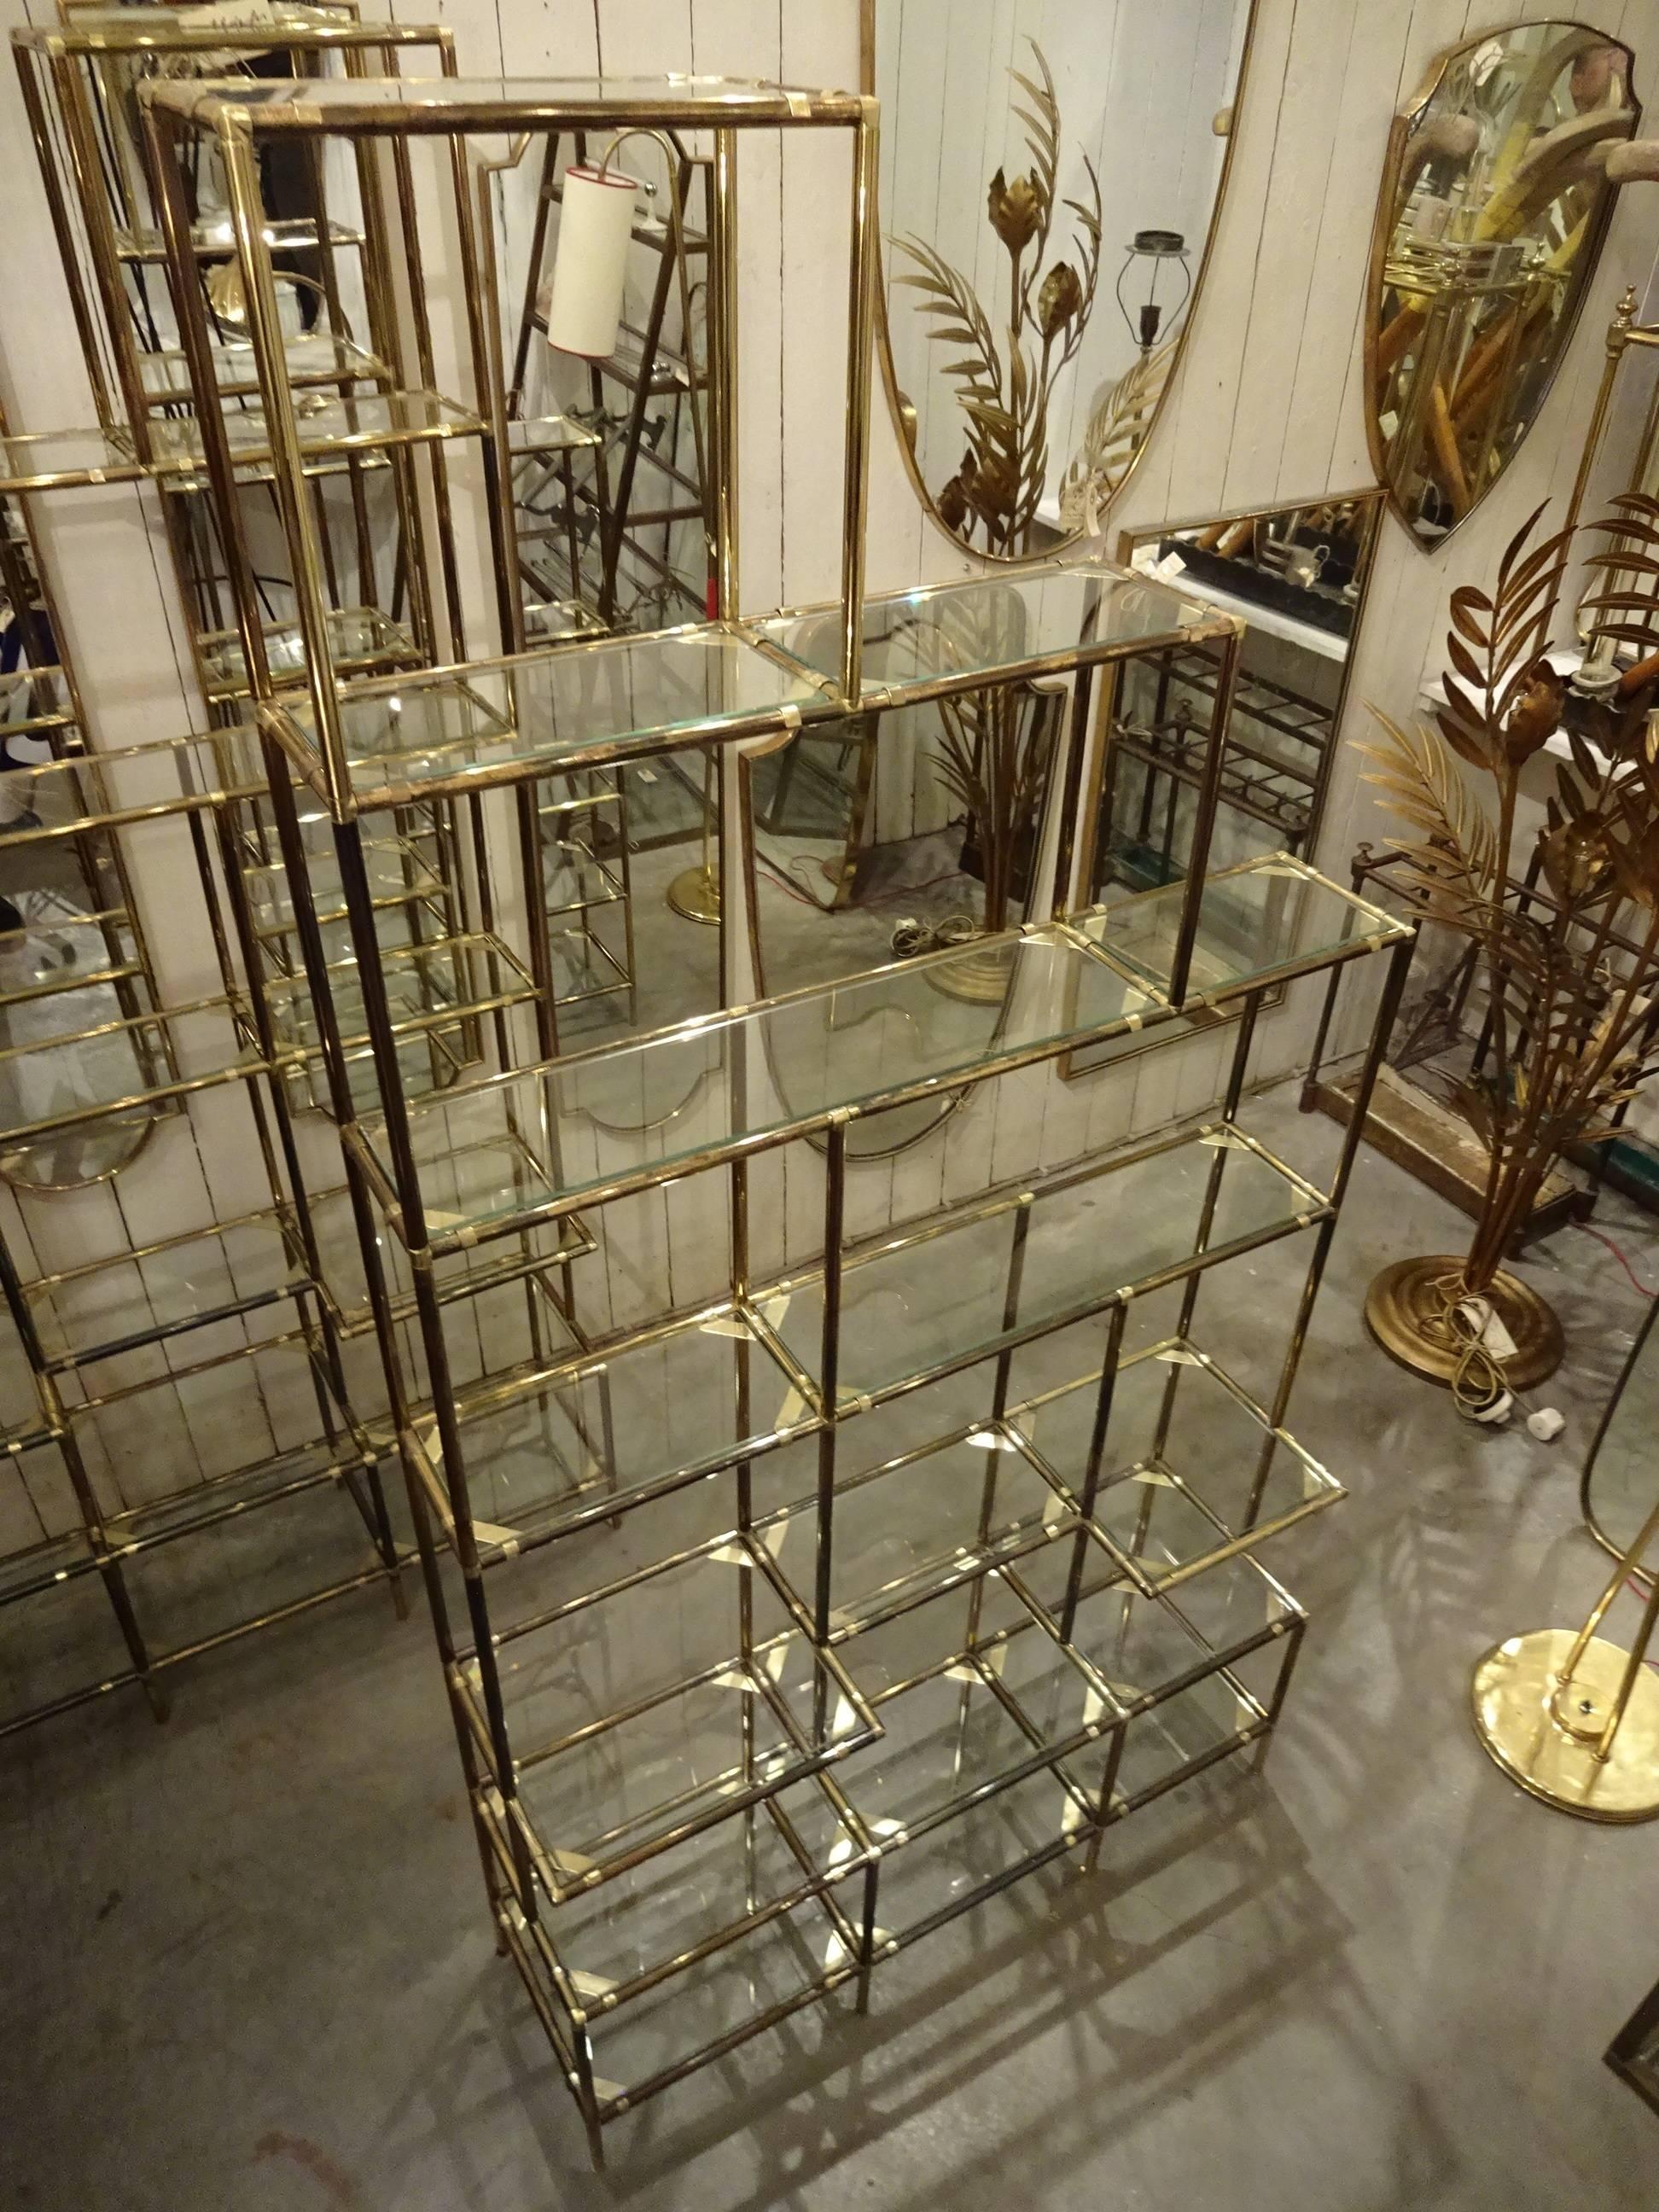 An utterly fantastic and unique pair of vintage Italian brass and glass shelving units with different depths, giving it an almost three-dimensional look. A true sculpture in itself. Originally from a shoe store in Milan from the 1950s.